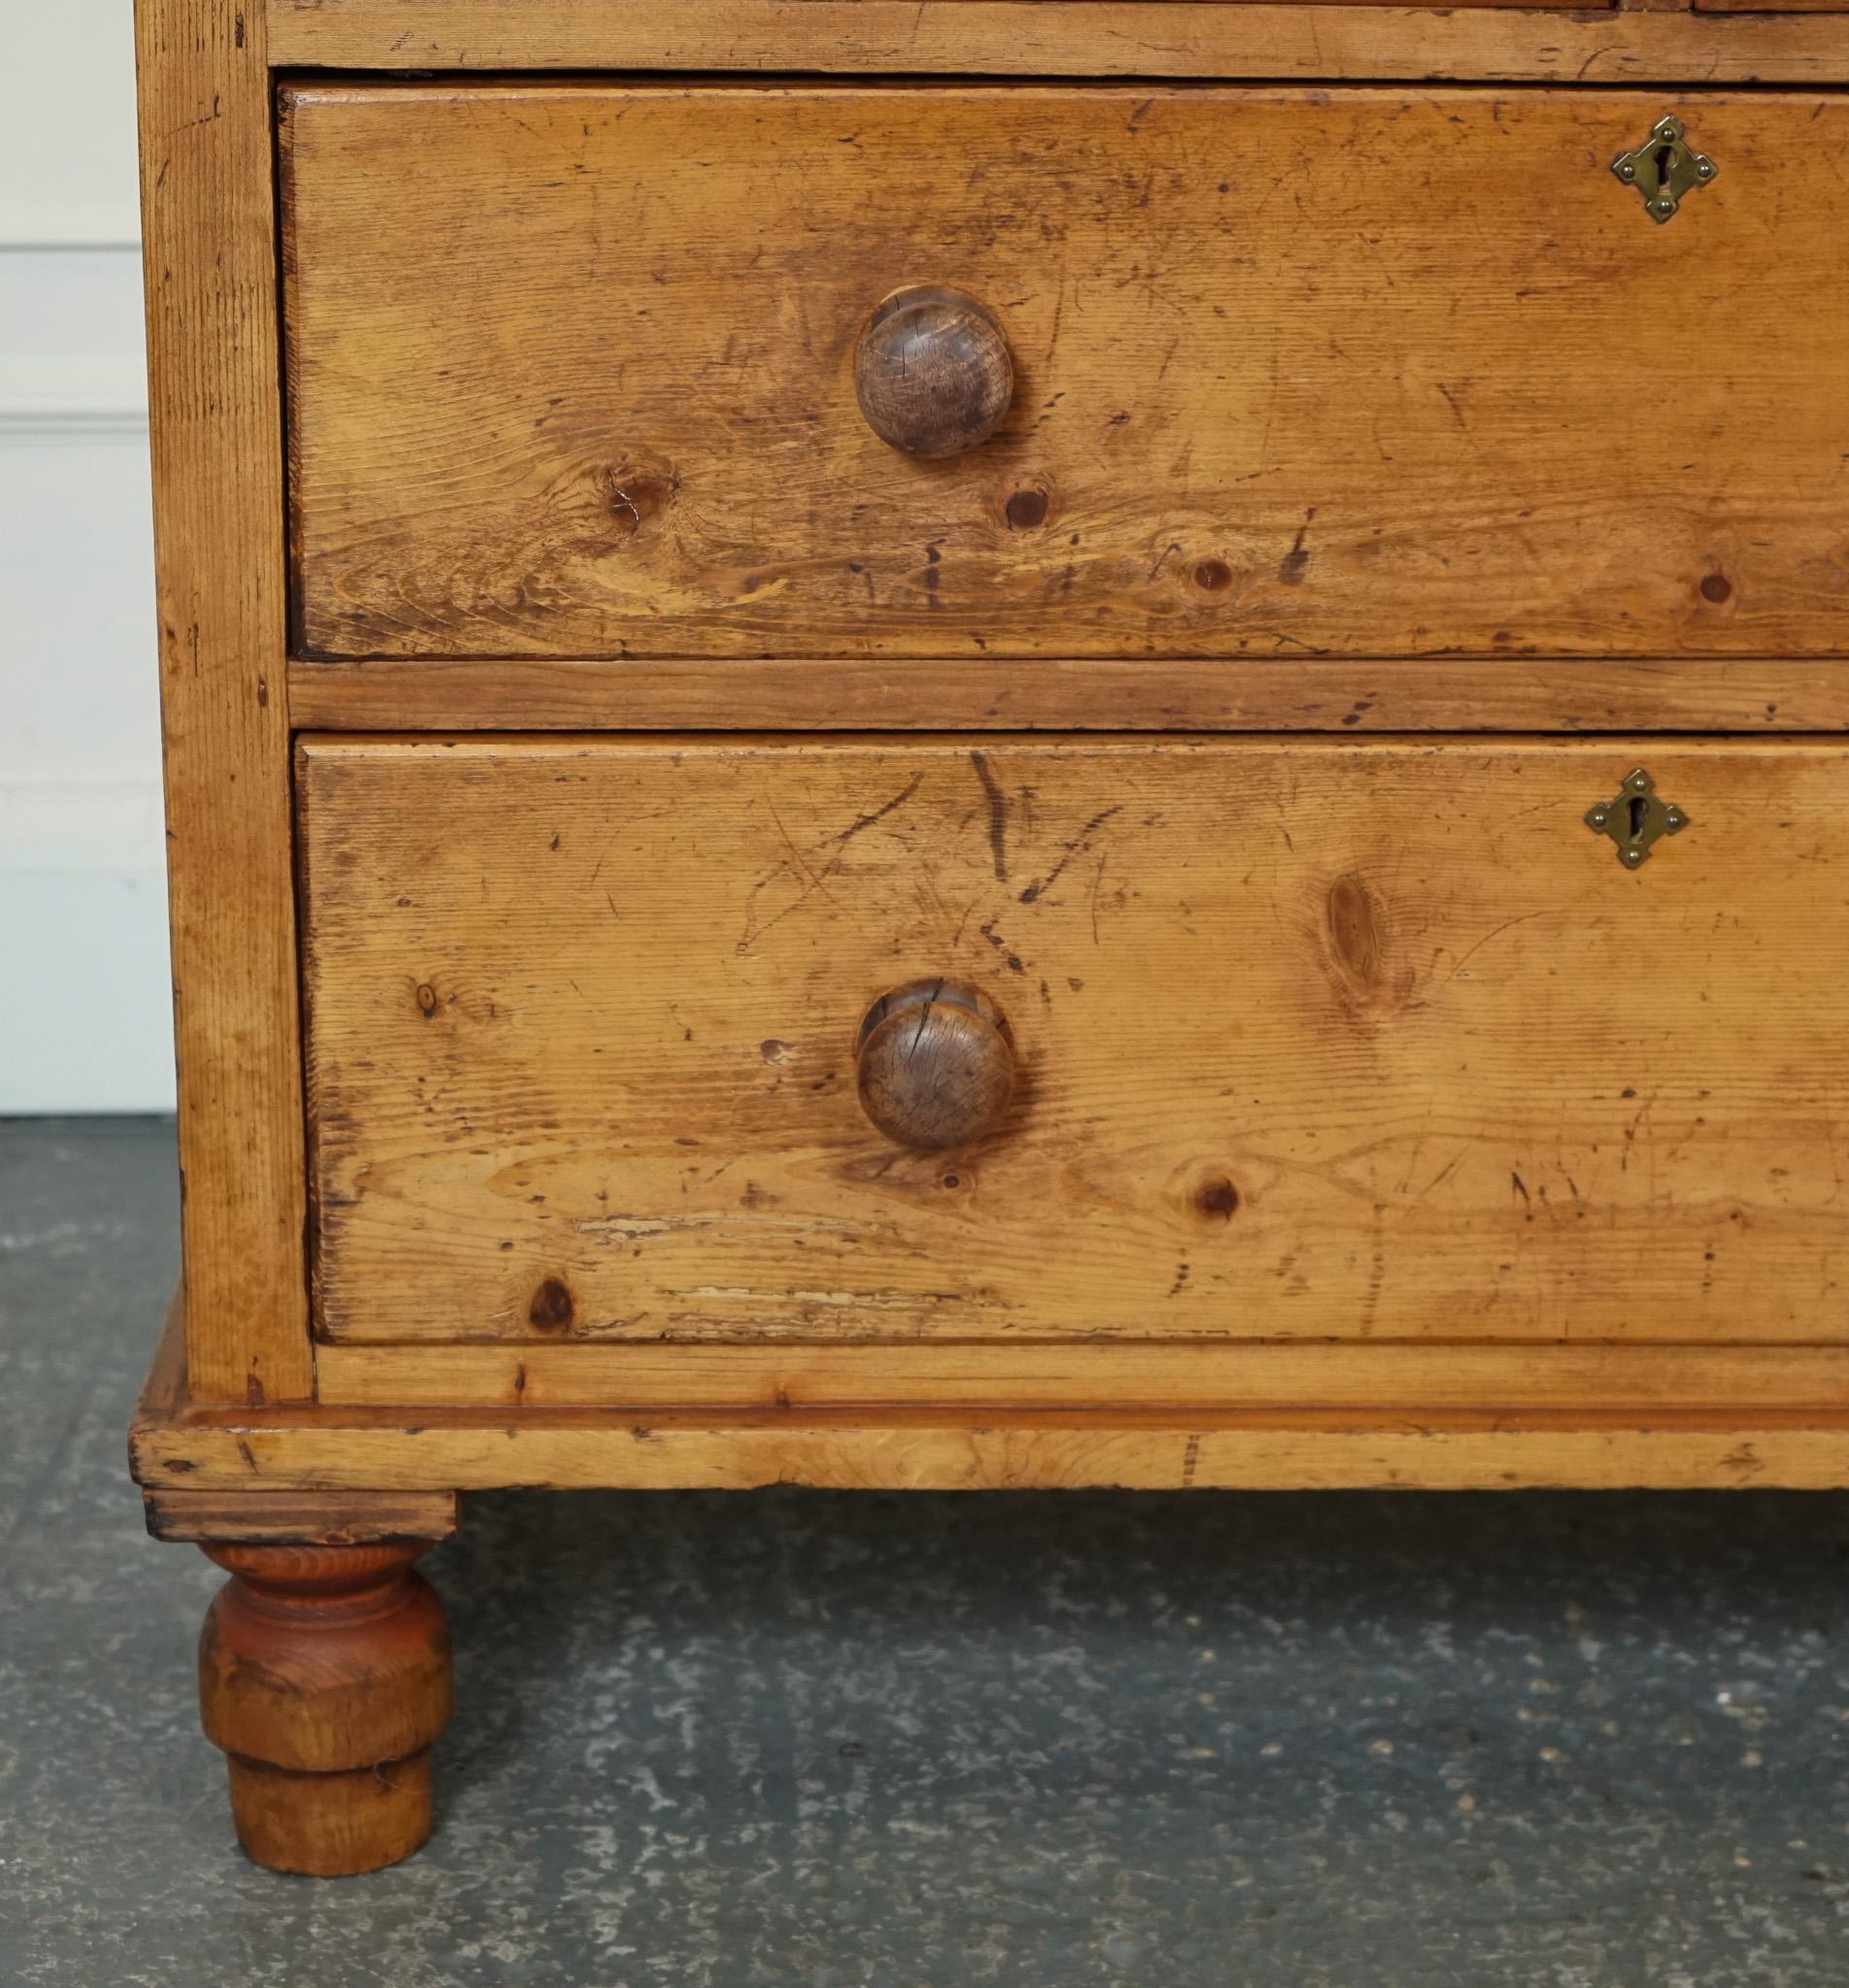 Pine ANTIQUE LATE VICTORIAN PINE CHEST OF DRAWERS WITH ORIGiNAL TURNED WOODEN HANDLES